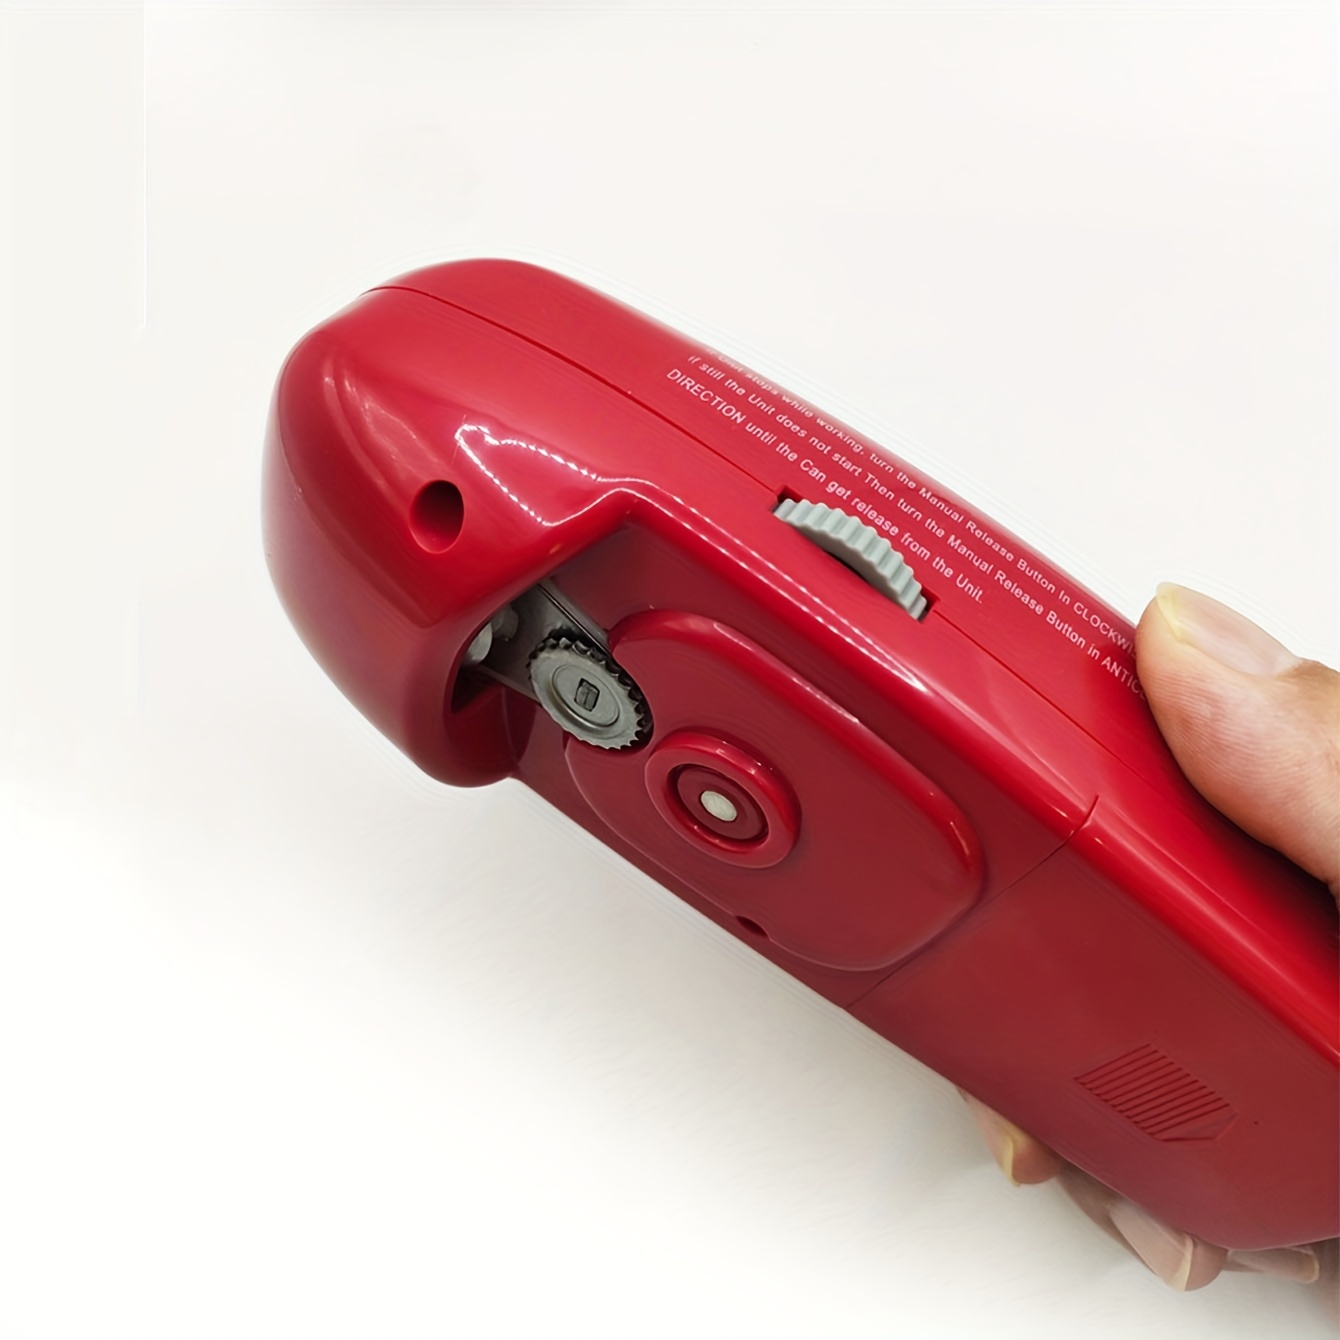 electric can opener-portable battery operated automatic